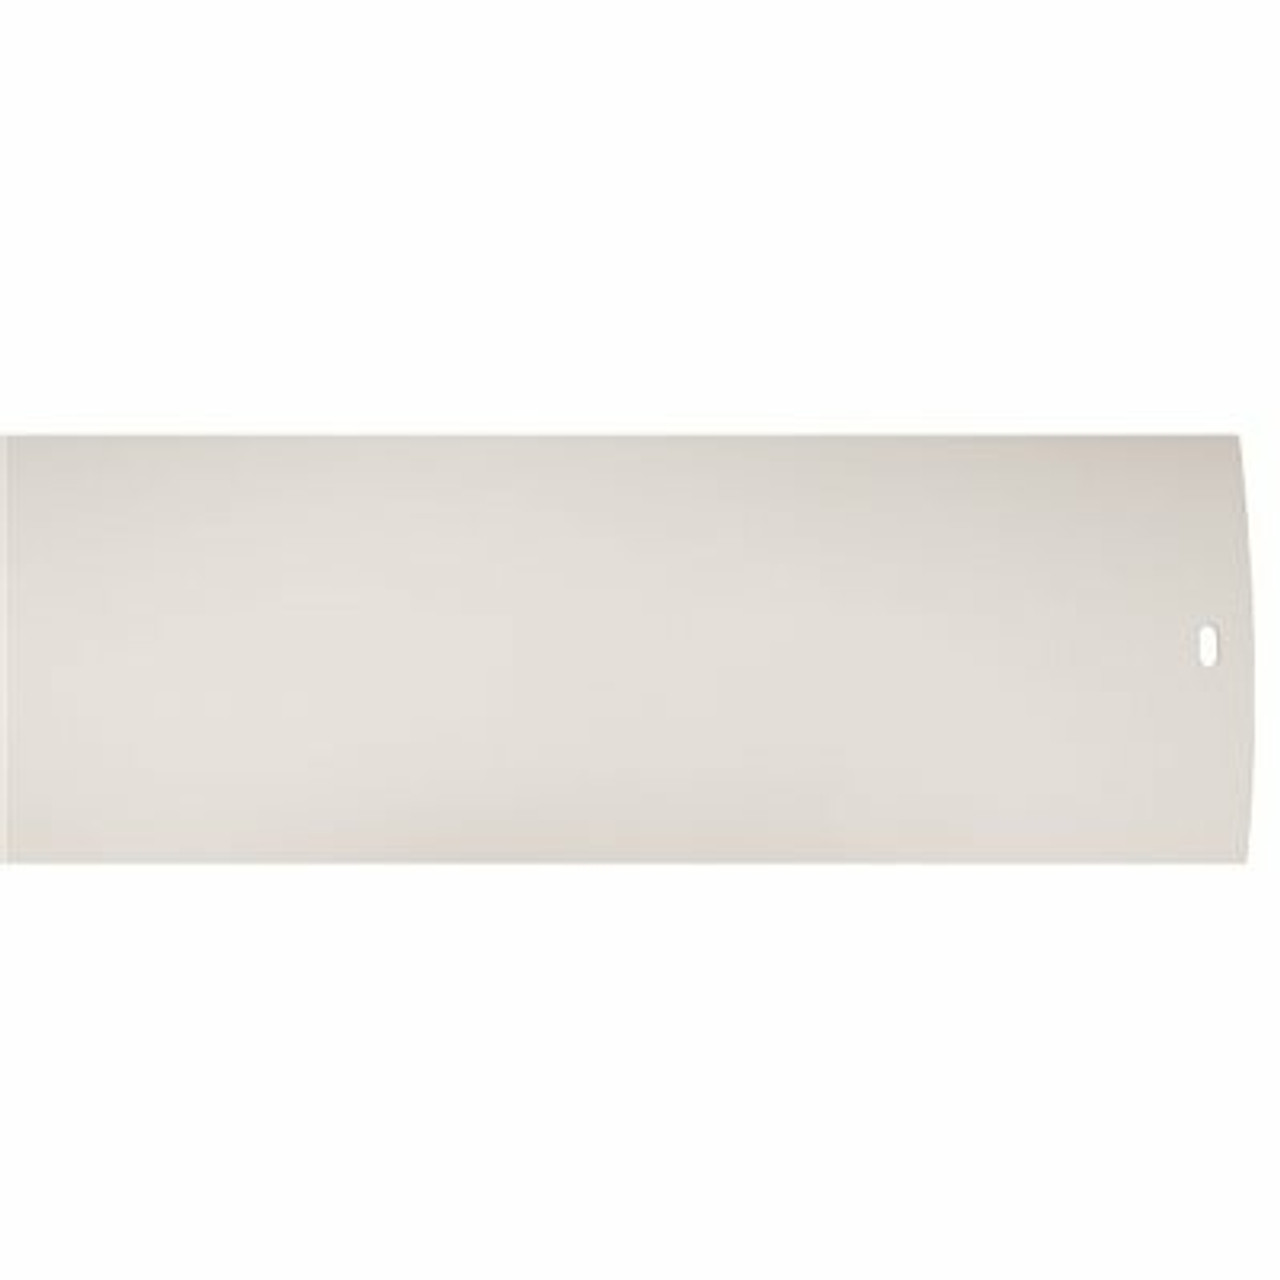 Designer's Touch Vertical Blind Vinyl Replacement Louvers, Fits 97-1/2 In. Blind, White (25 Per Pack)